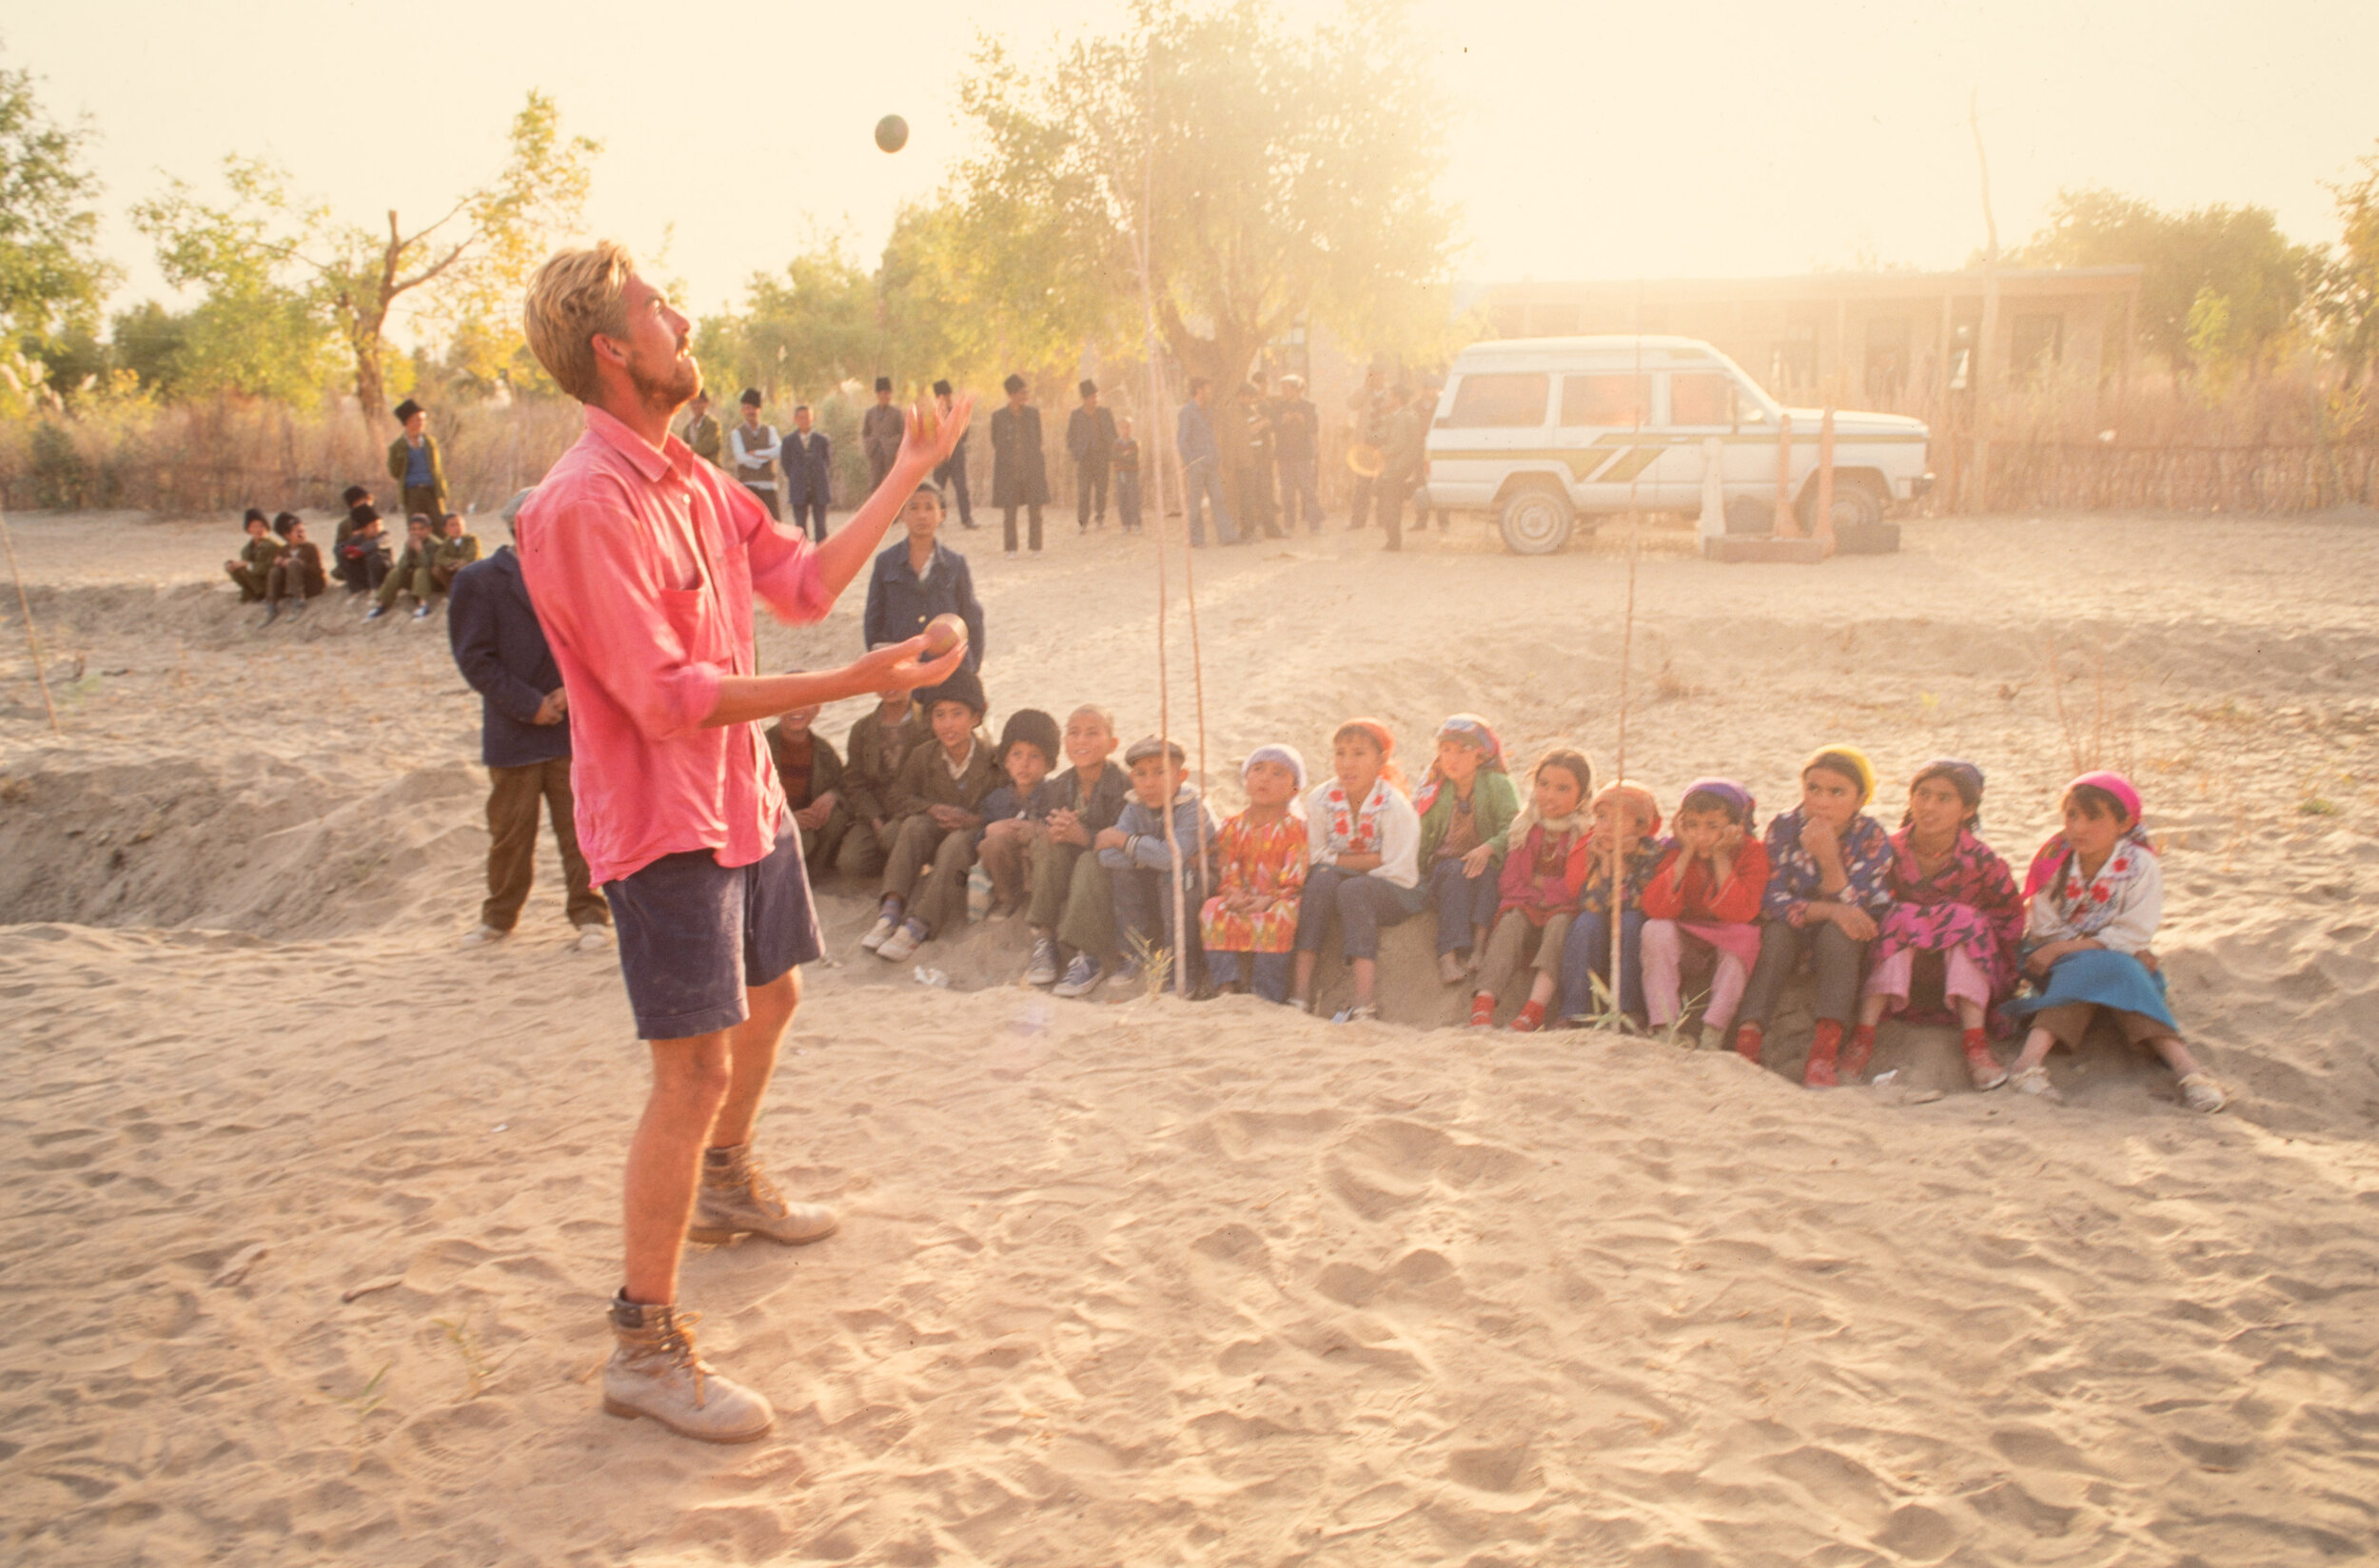  Mark puts on a show for some of the Uighur children at an outpost deep in the desert.  